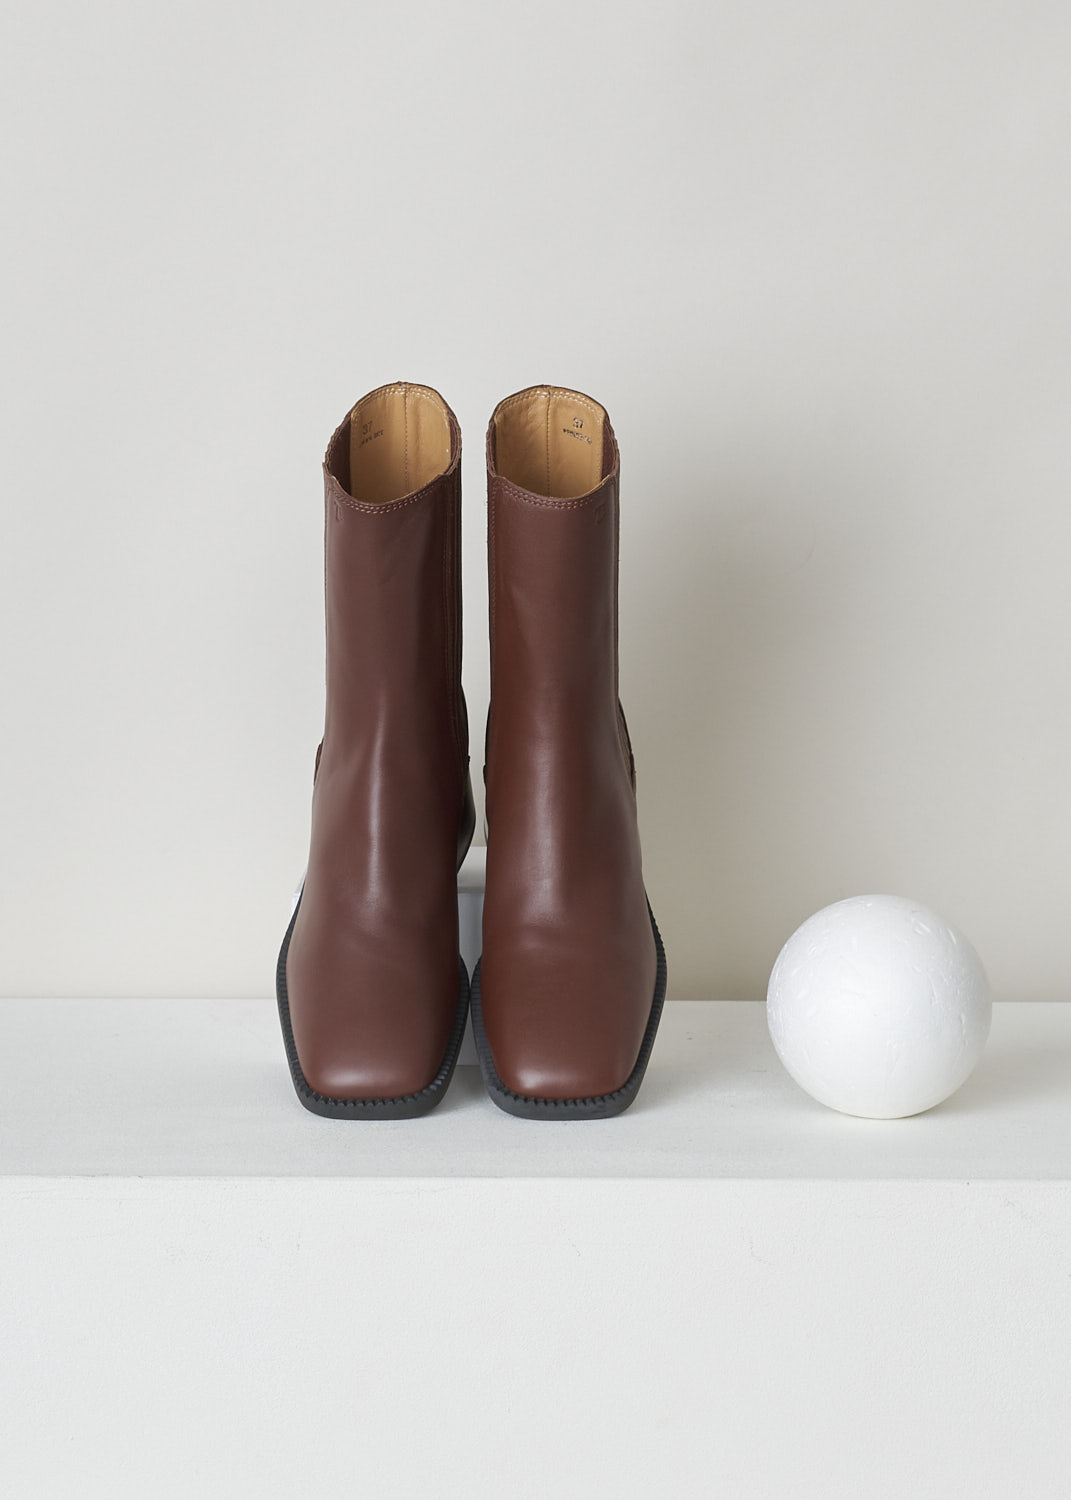 TODS, WARM BROWN BOOTS WITH GUSSETED SIDES, XXW48K0FX80TFSS202_T55_TRONCH_ELAST, Brown, Top, These warm brown leather slip-on boots feature elasticated gusseted sides with a ribbed pattern, a squared toe and a block heel in brown. 

